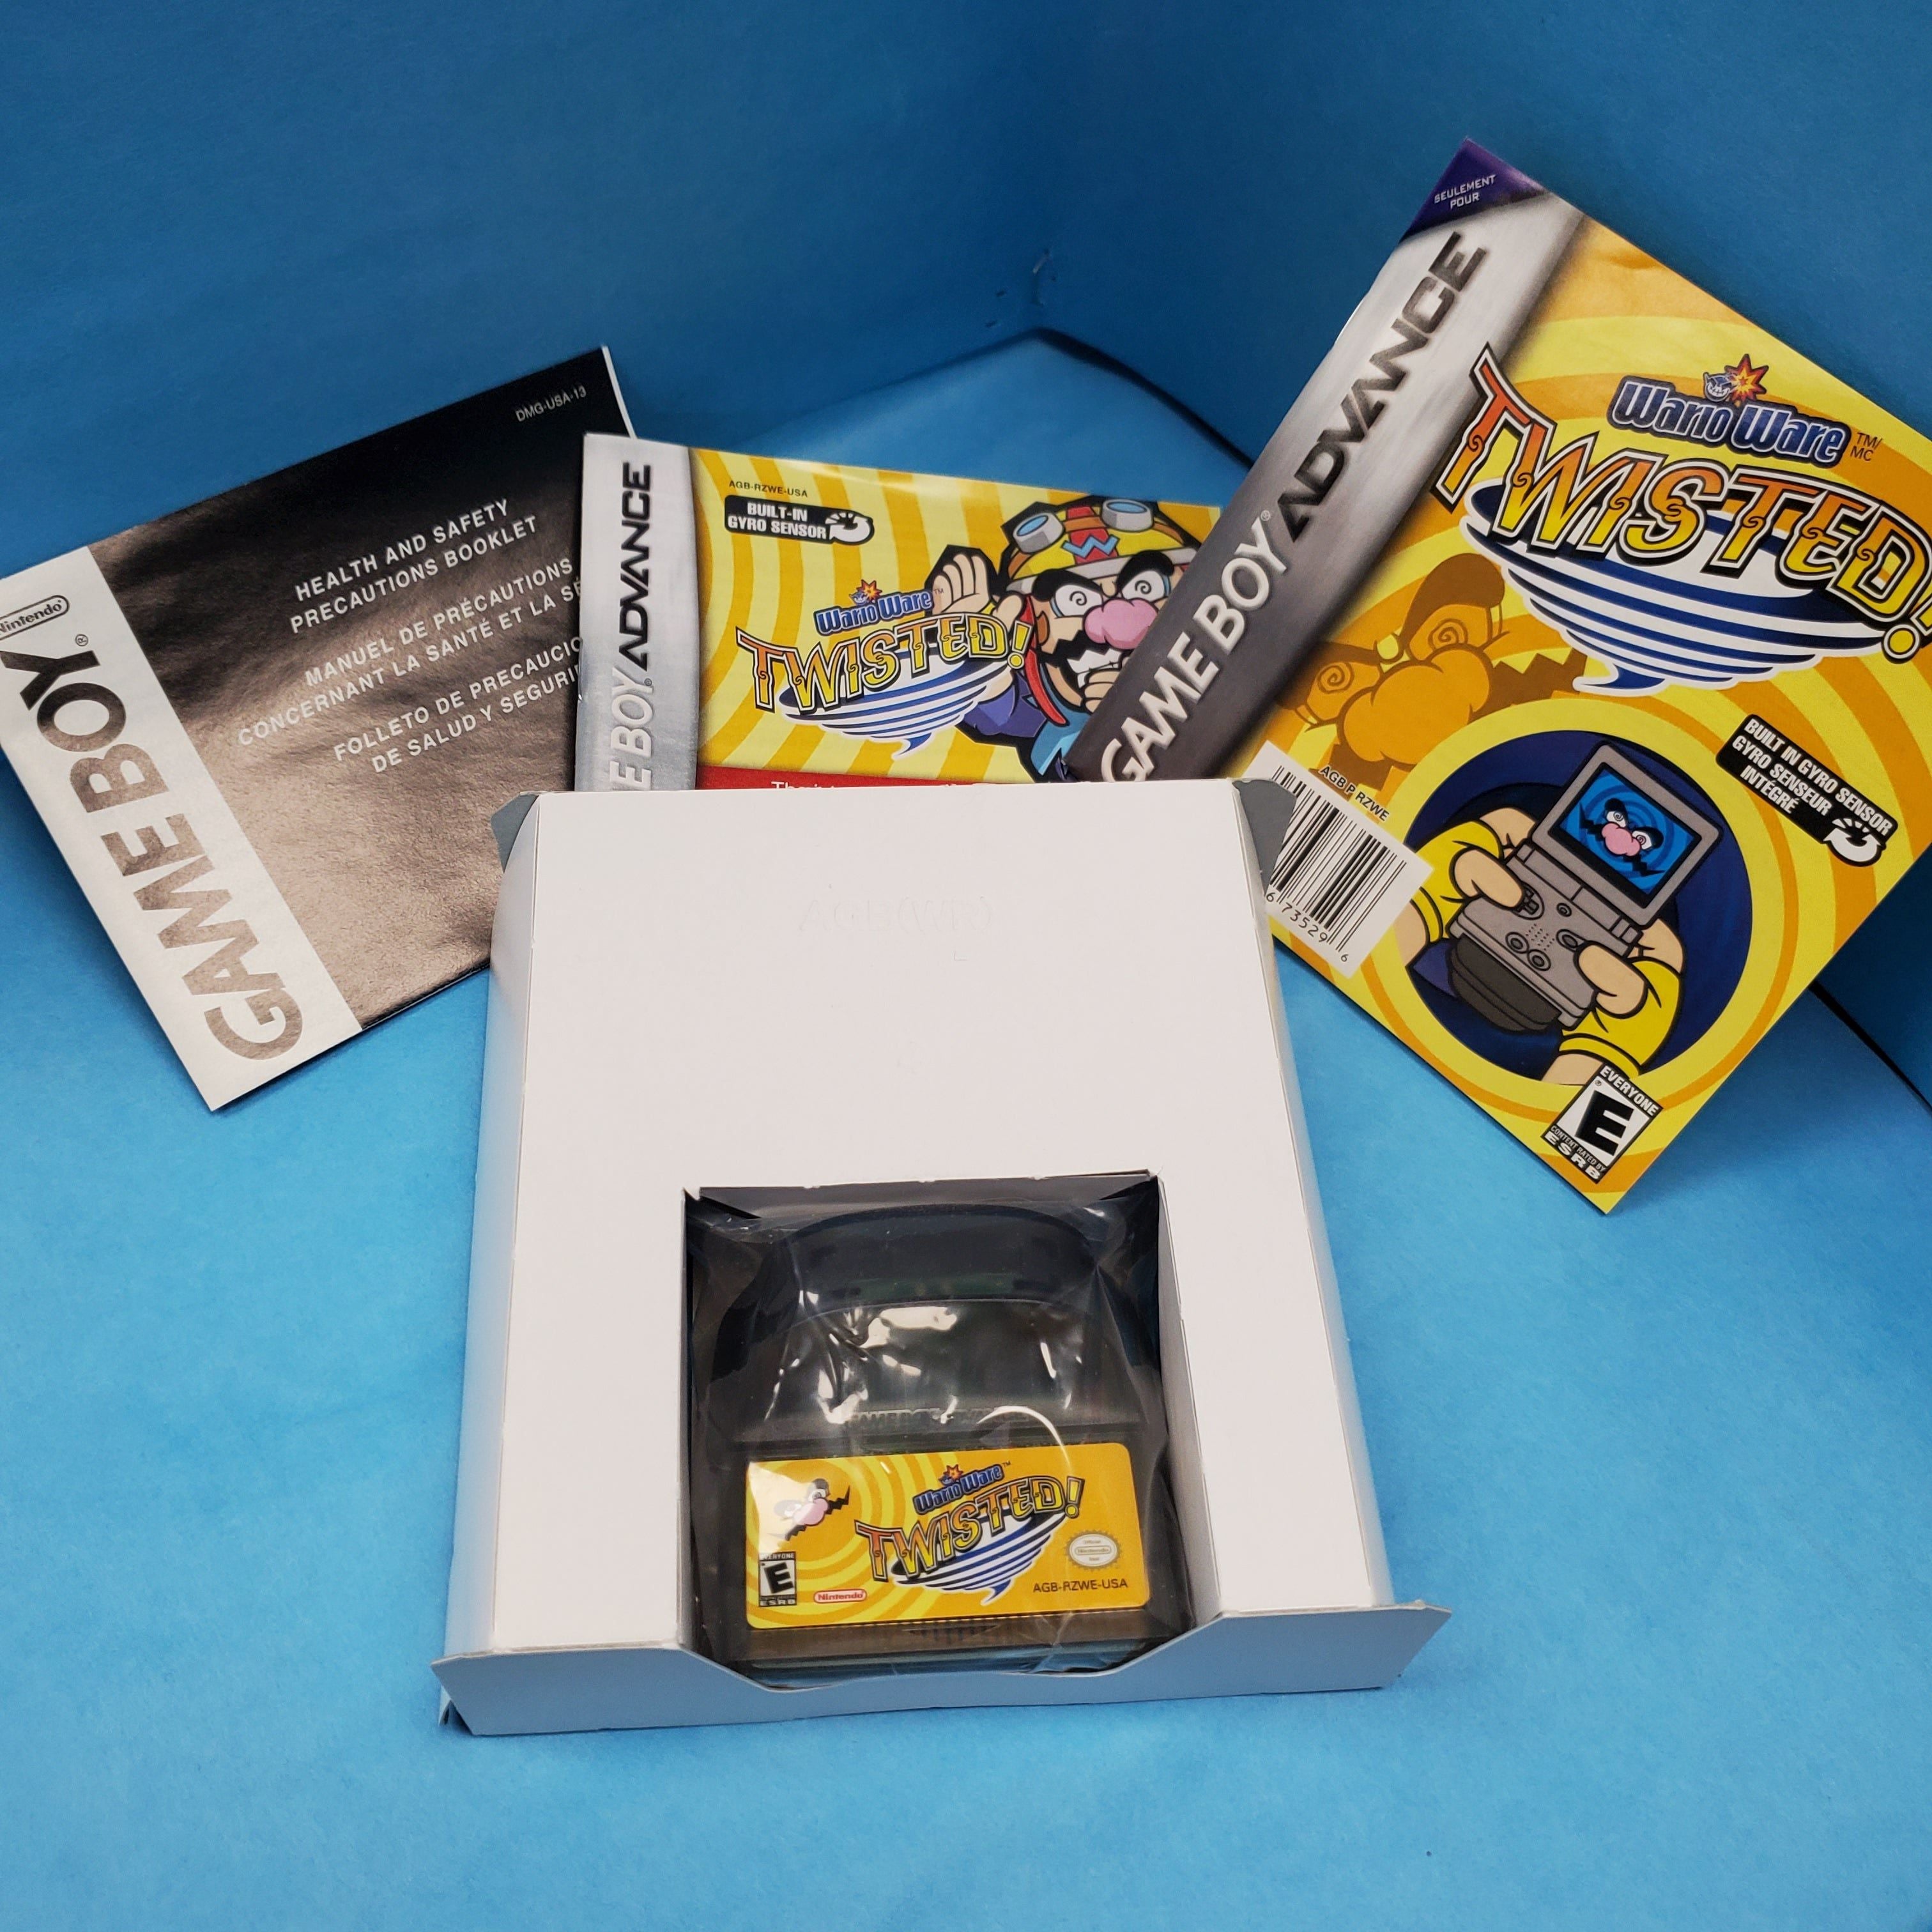 GBA - WarioWare Twisted! (Complete in Box / Grade A / Complete)